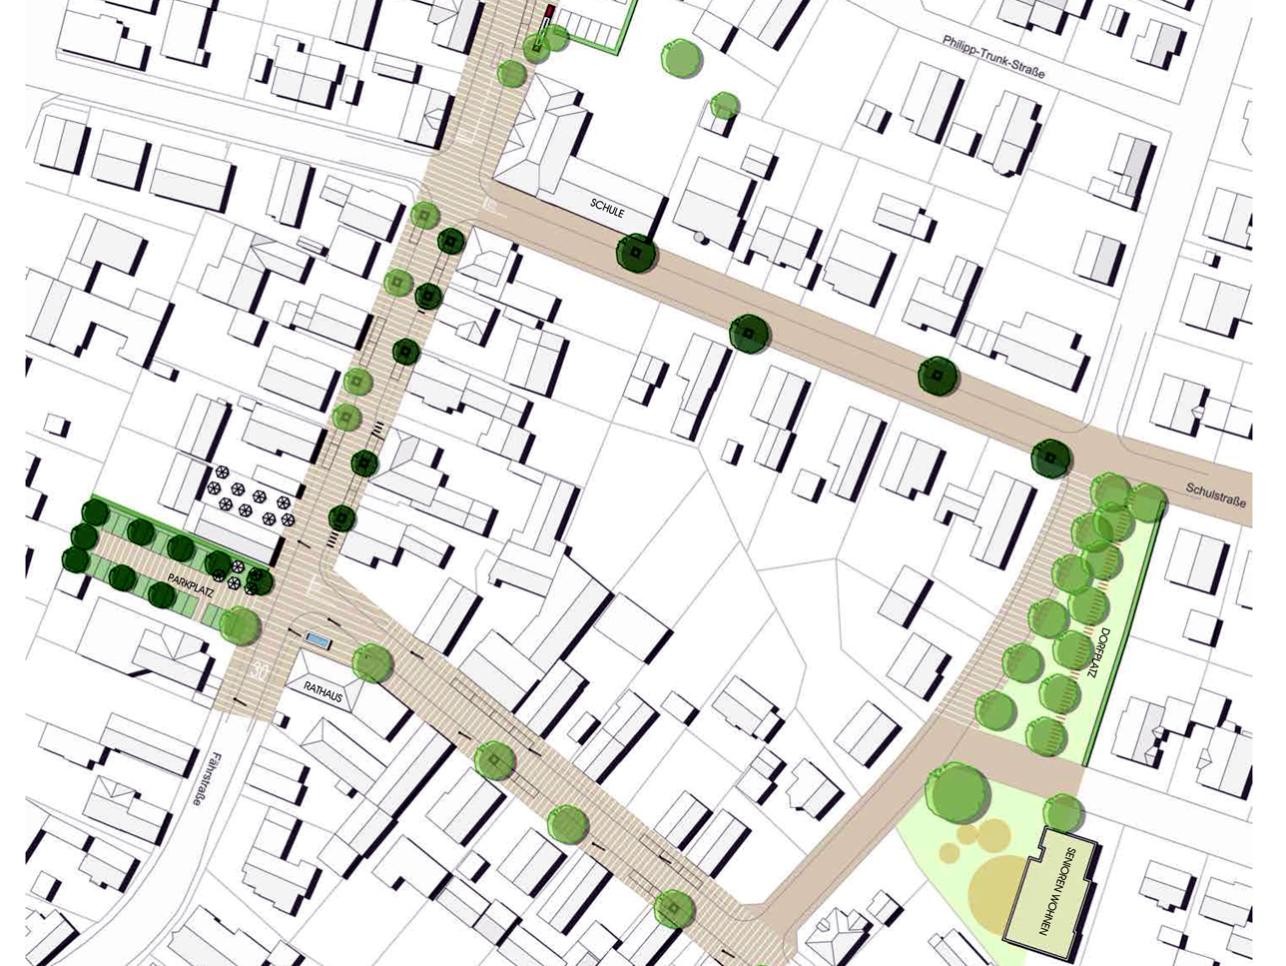 Plan of the new Plittersdorf town center with streets, houses and trees